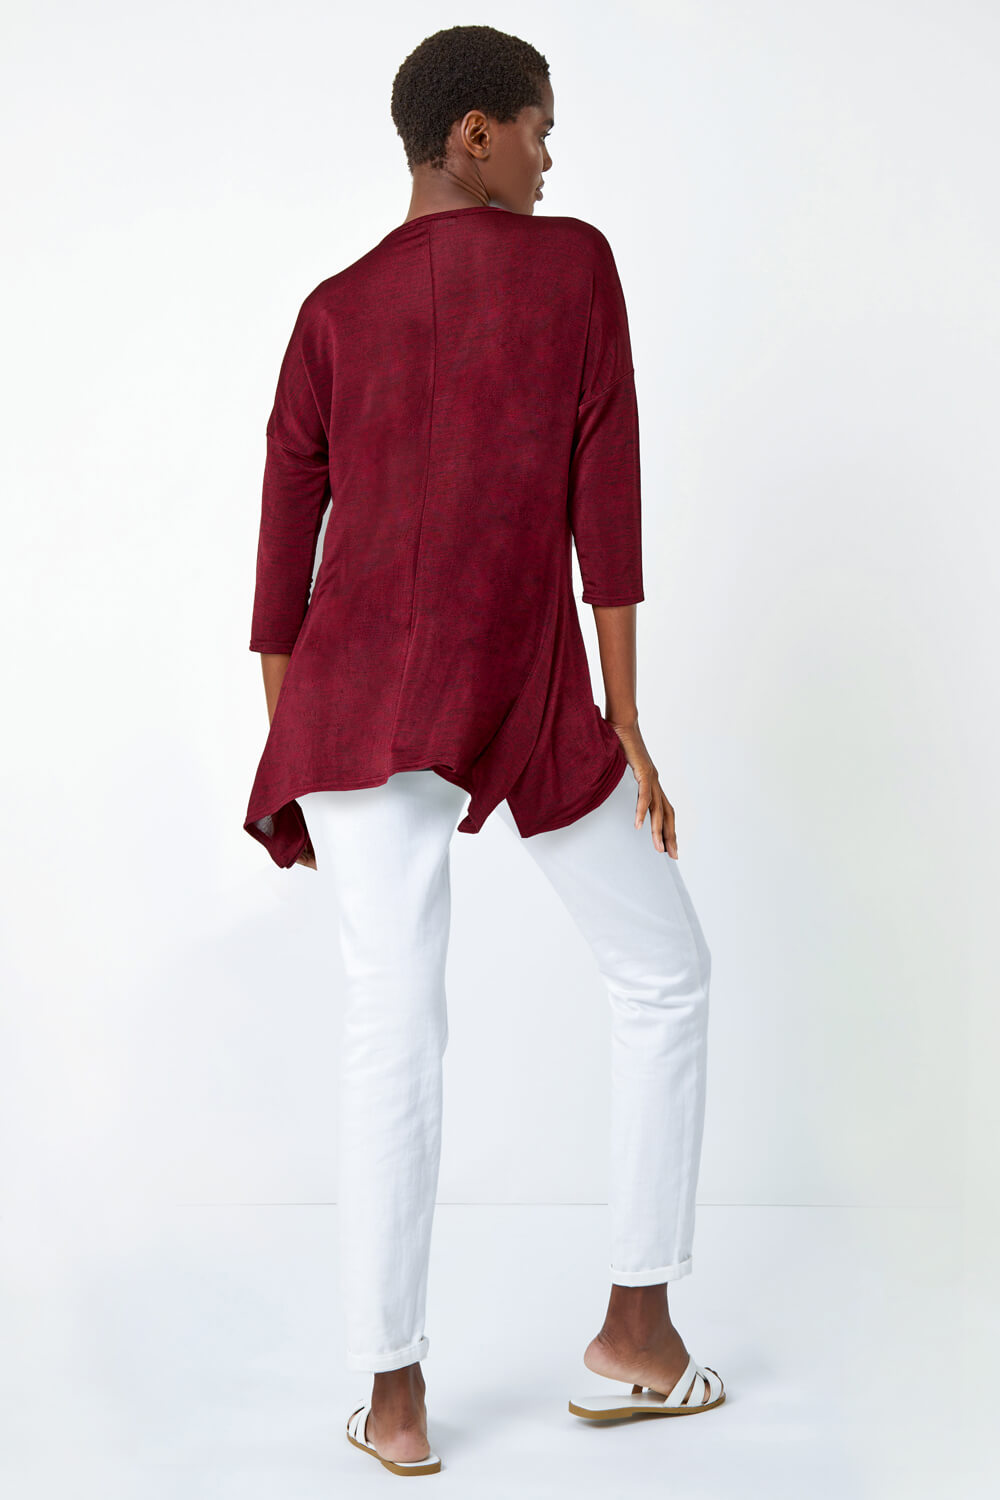 Red Marl Soft Stretch Top, Image 3 of 5